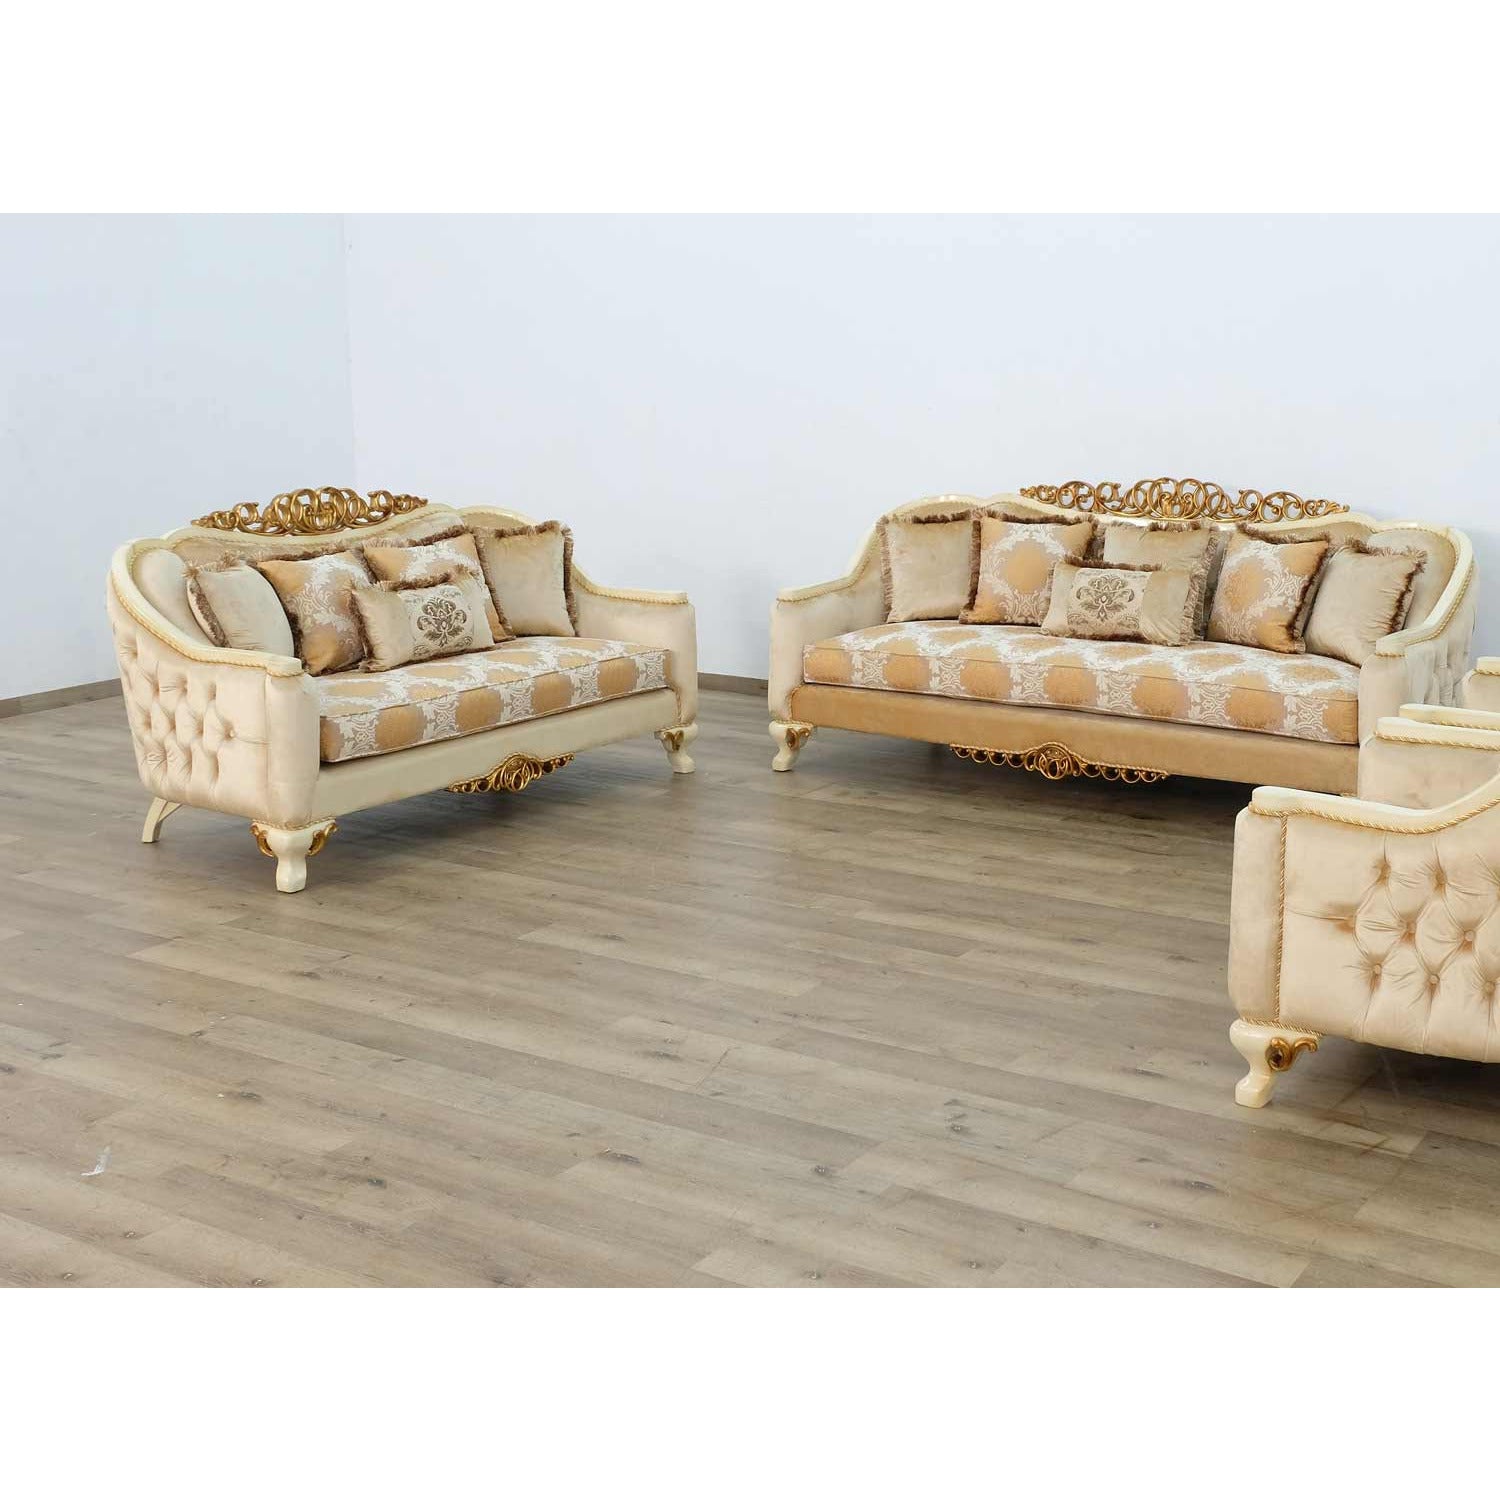 European Furniture - Angelica 2 Piece Living Room Set in Brown & Gold - 45352-2SET - New Star Living